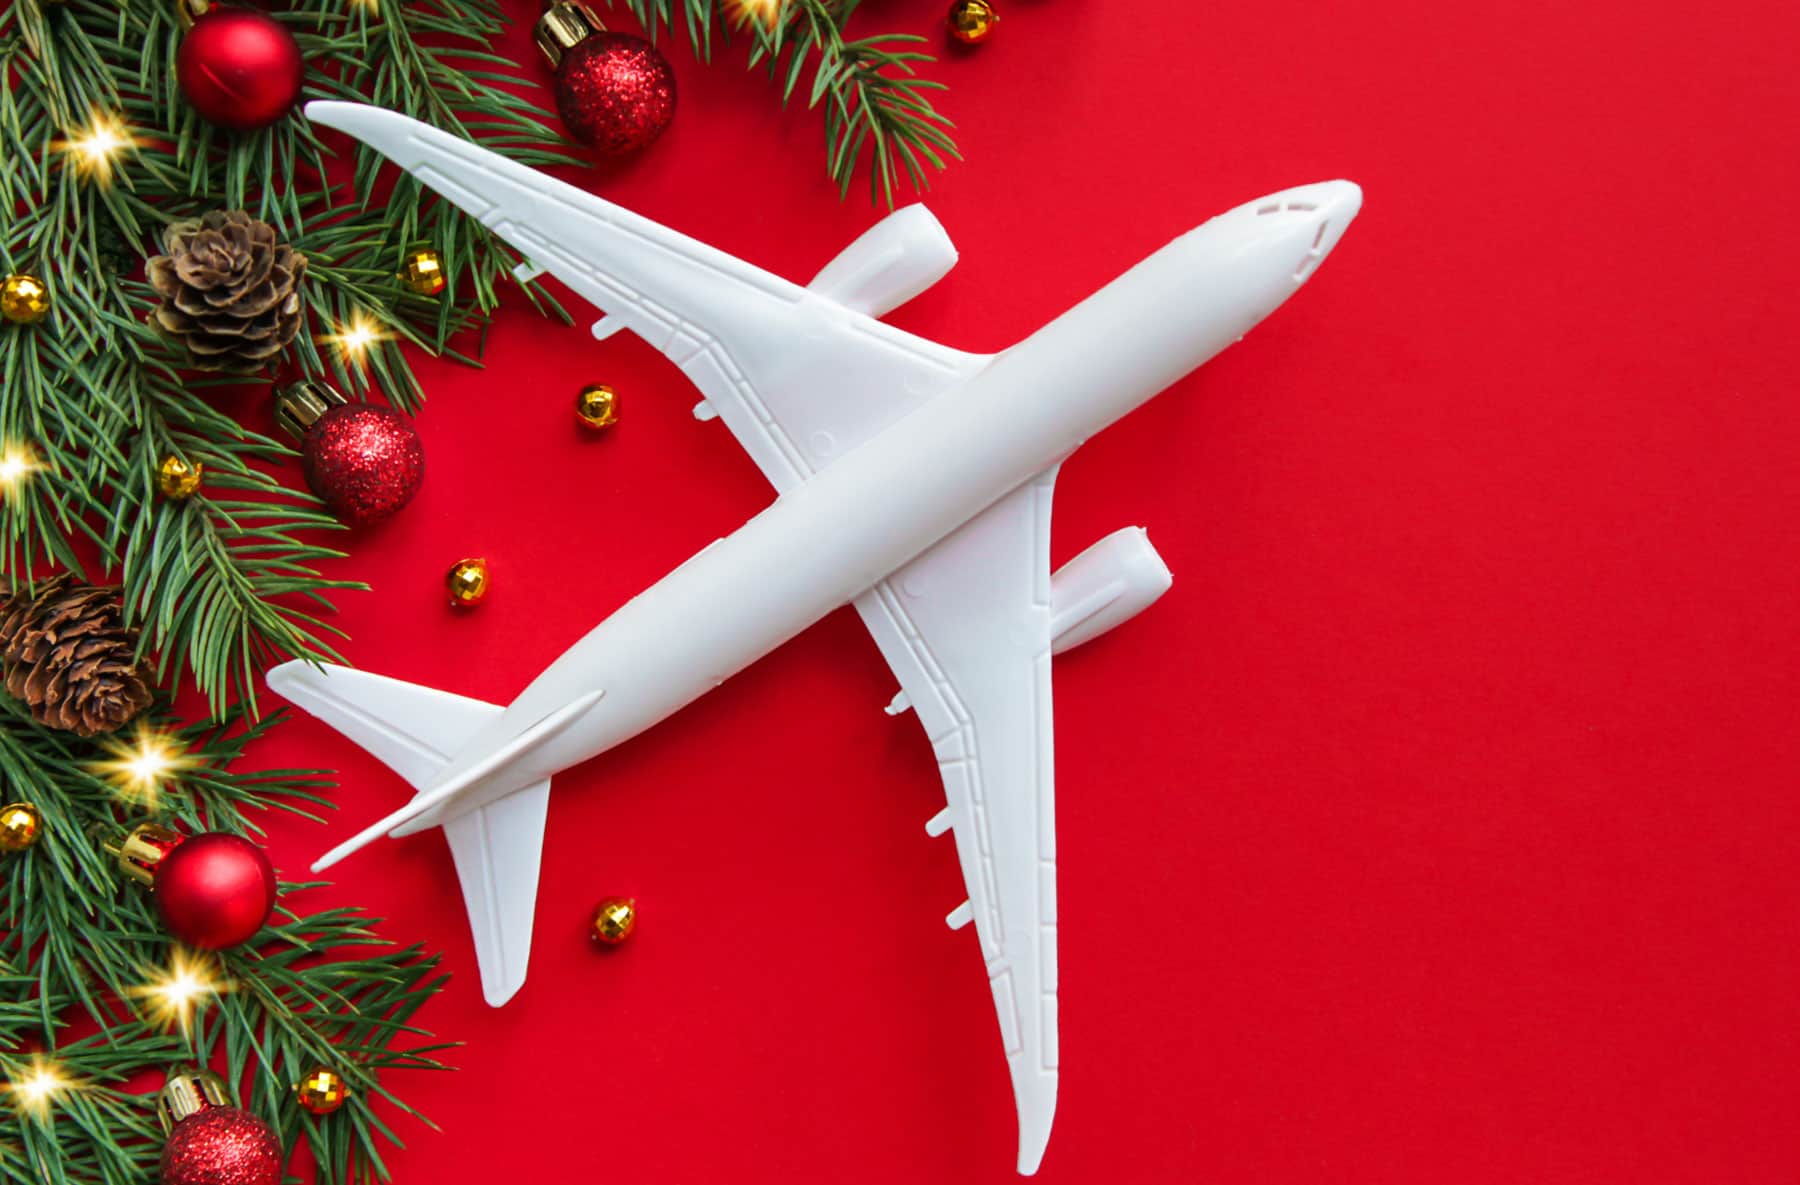 Airplane with red background and Christmas decorations